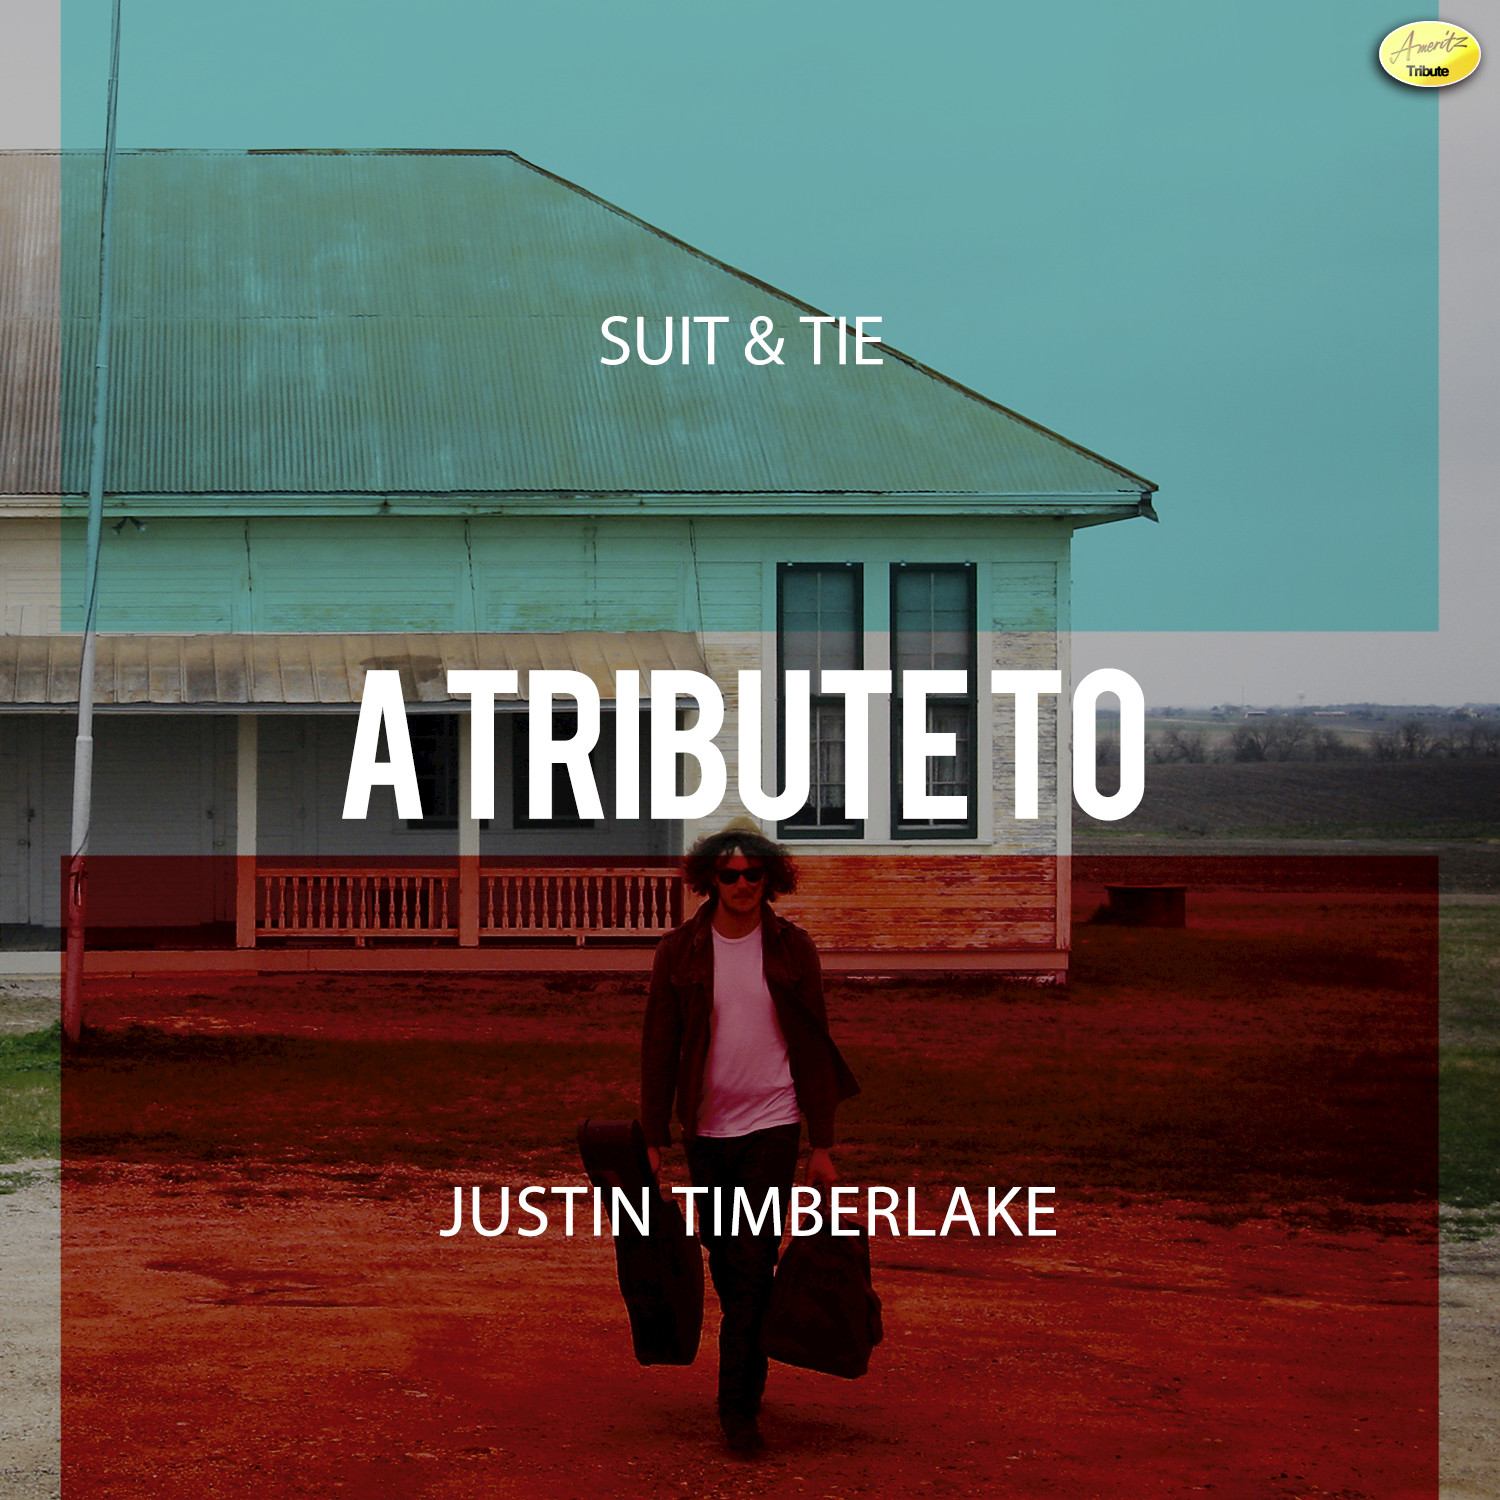 Suit & Tie - A Tribute to Justin Timberlake